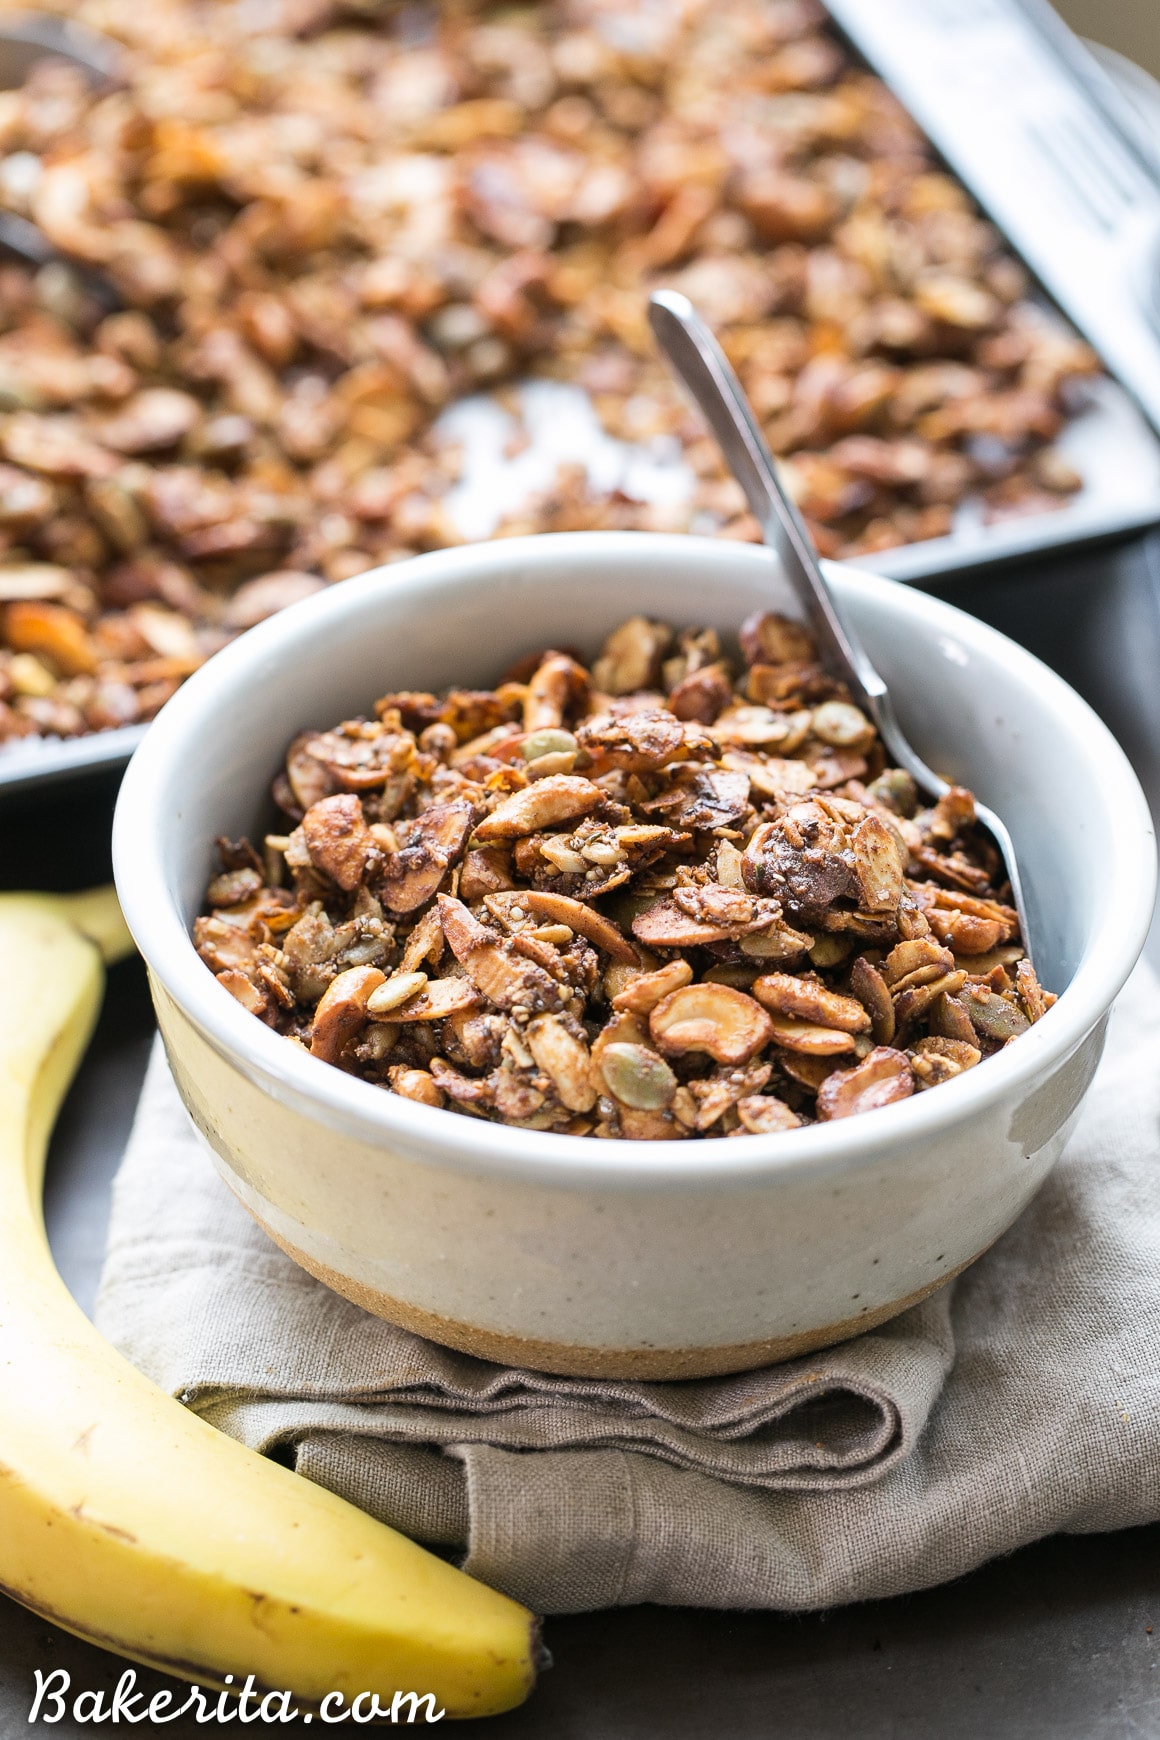 This Banana Almond Butter Grain Free Granola is a crunchy + filling snack, made without any grains or refined sugars! It makes the perfect yogurt or smoothie bowl topping, or just grab a handful to hold you over until your next meal.